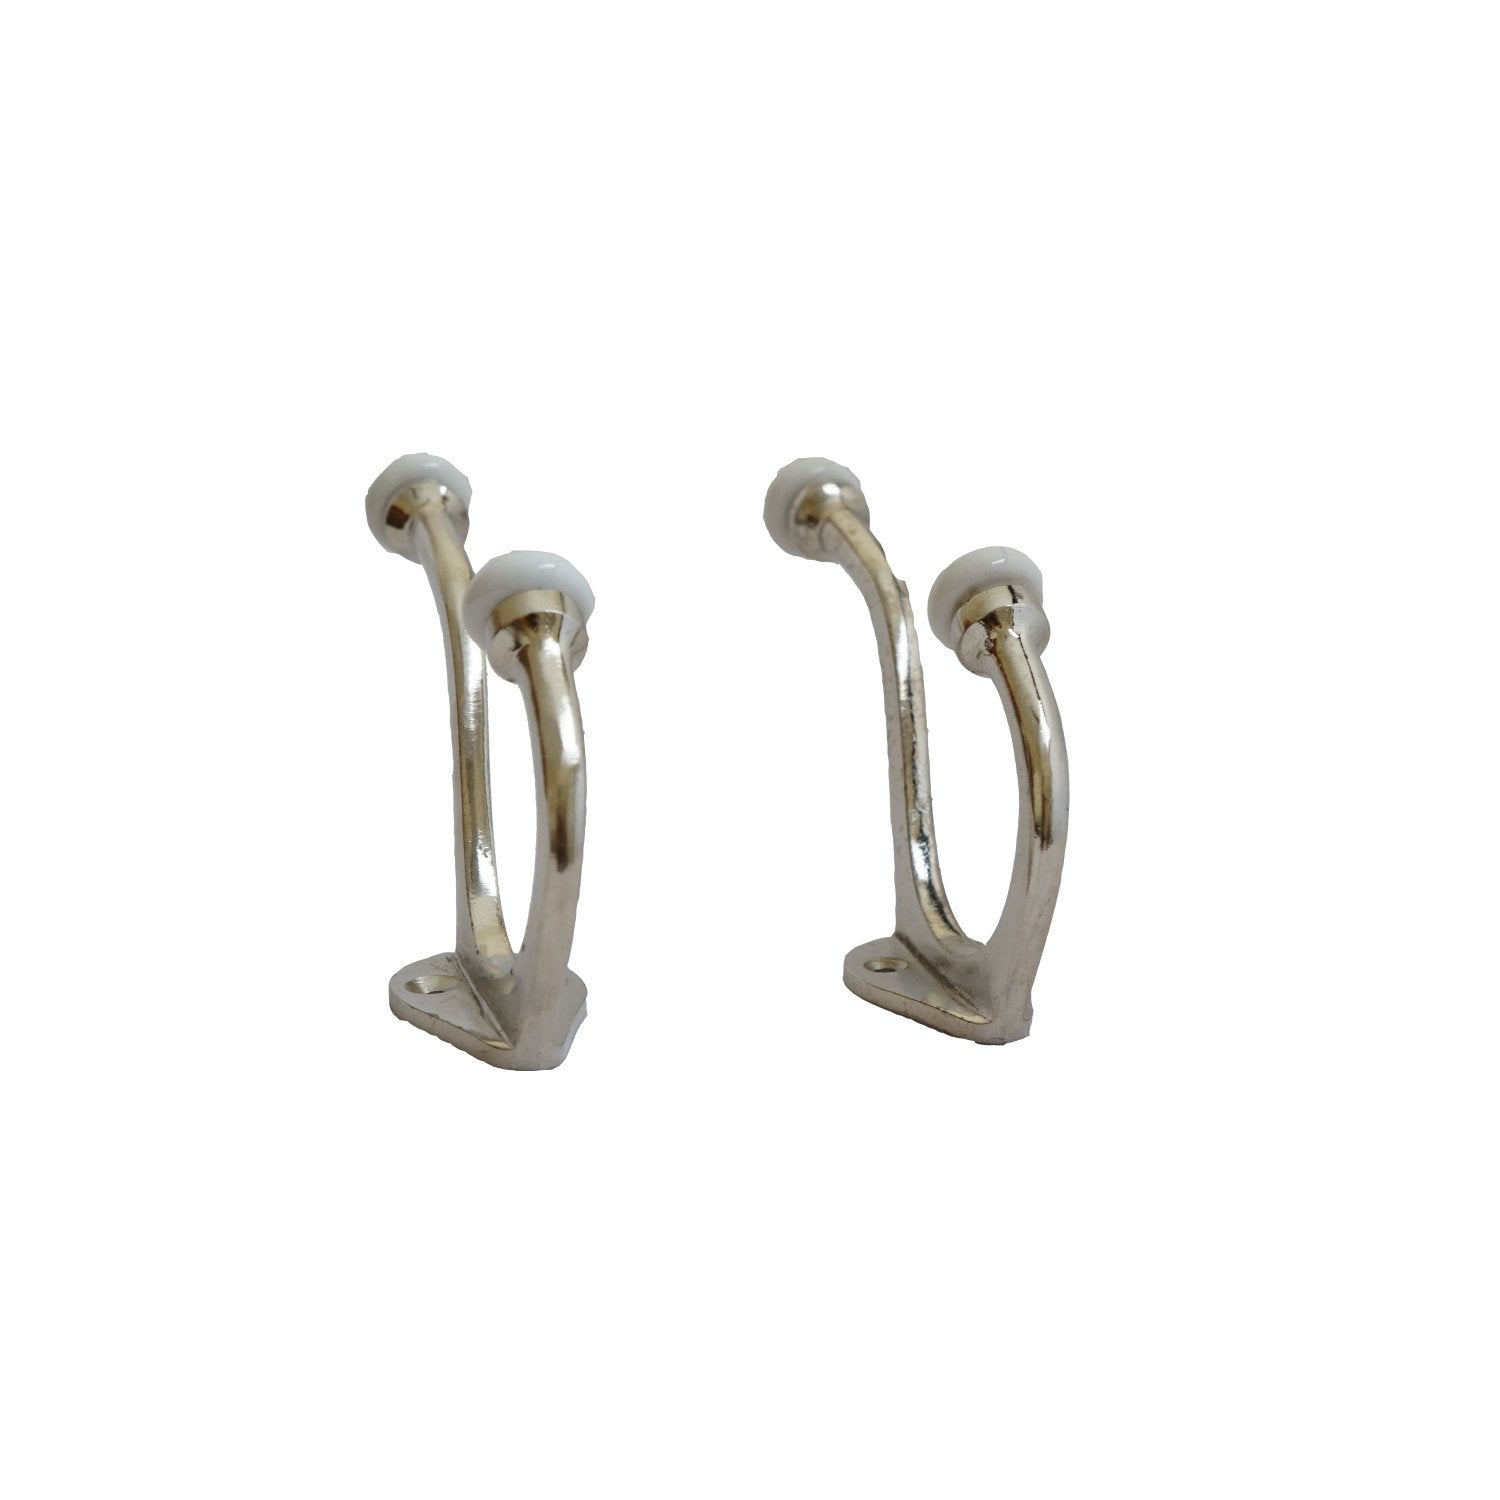 Set of 2 bachau Metal Hooks Over The Door Hook Rack 2 Knobbed Hooks and Stainless Steel Organizer by Perilla Home 0.246kg